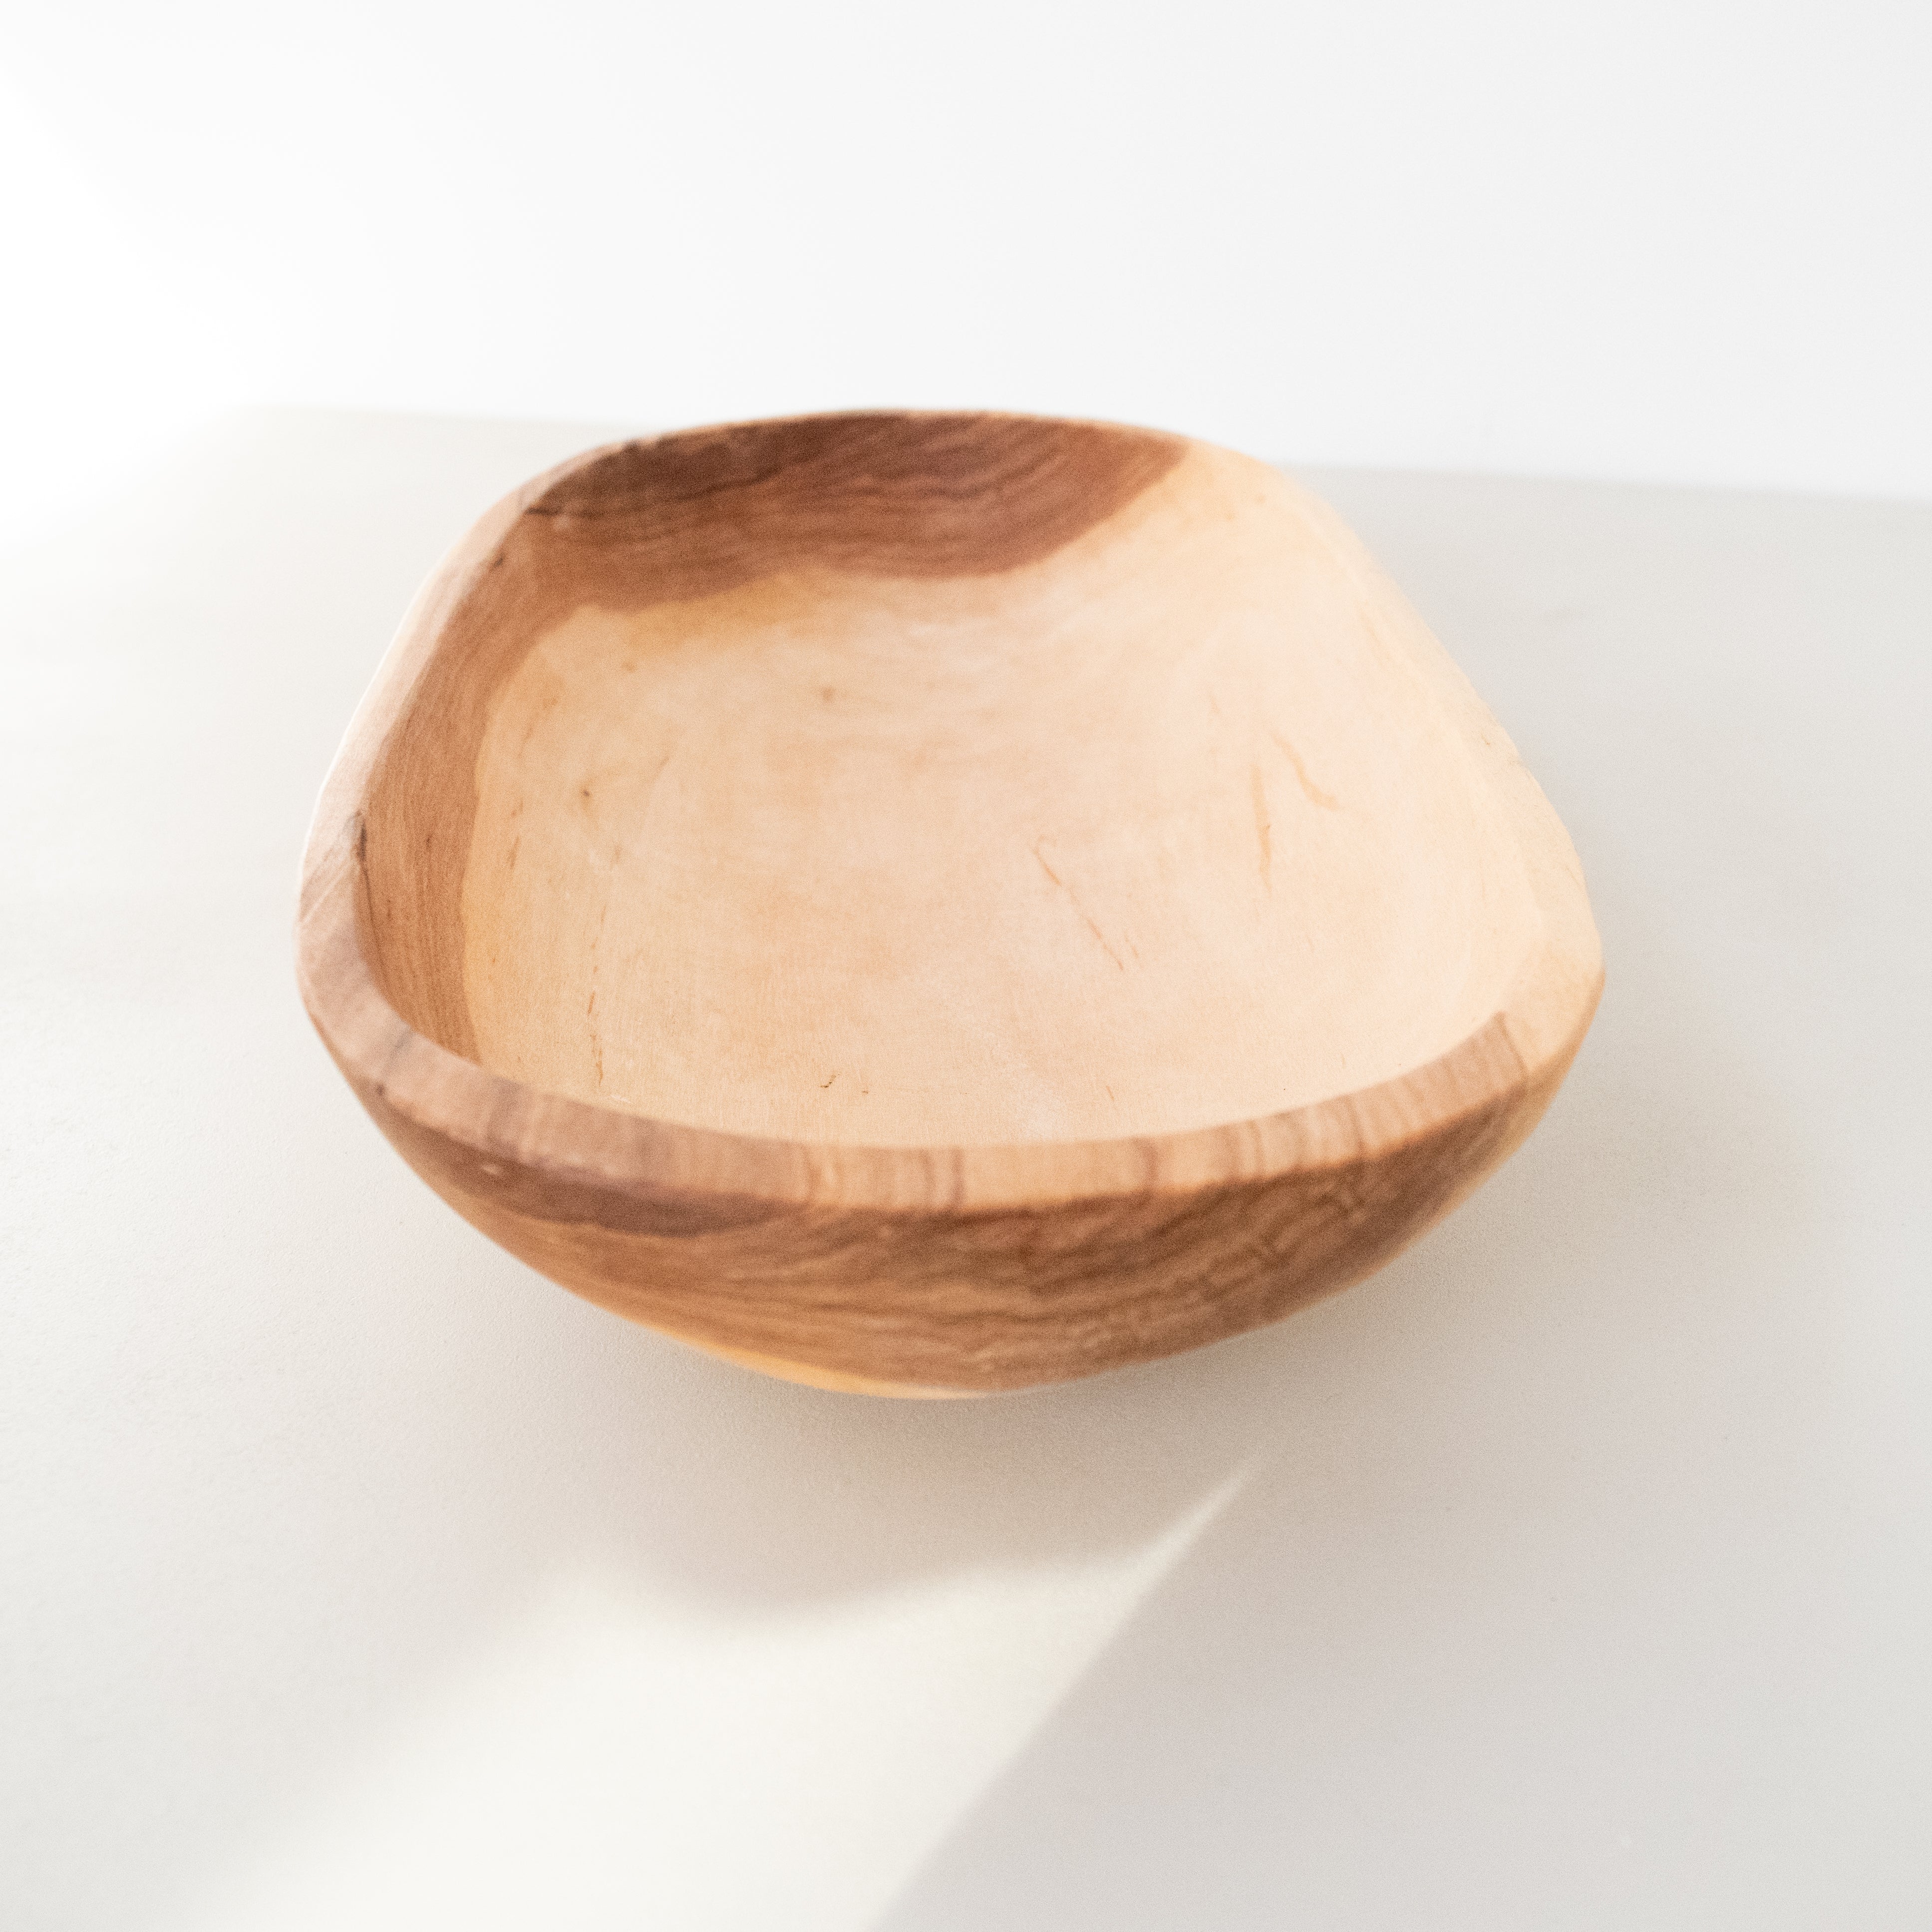 Olivewood Oval Bowl - hand carved by local Kenyan artisans for a Fair Trade boutique